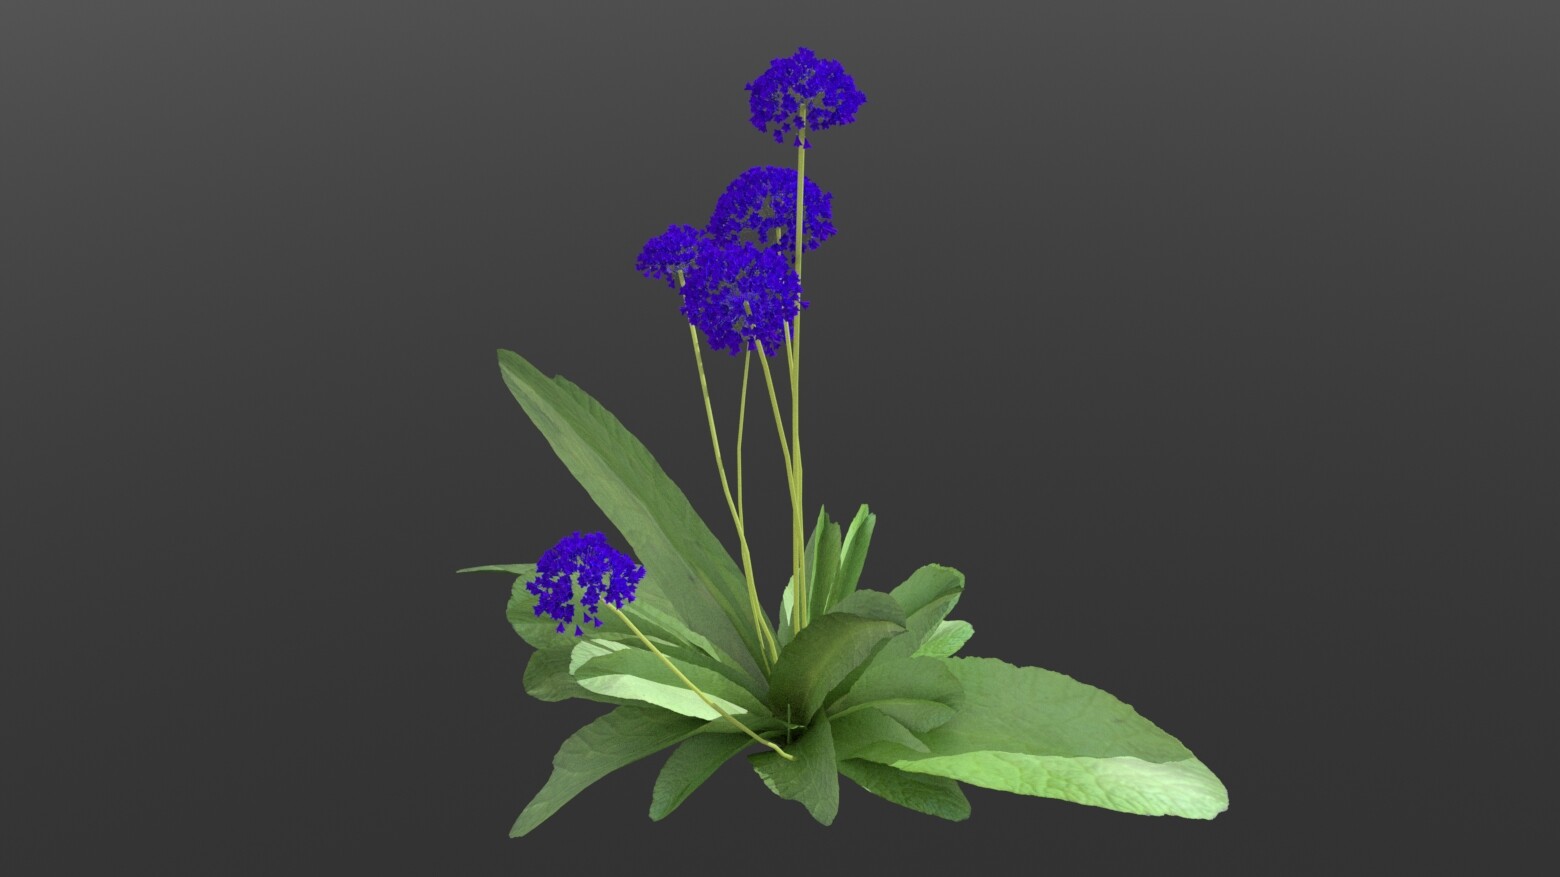 Old work - flowers on modeled statice plant